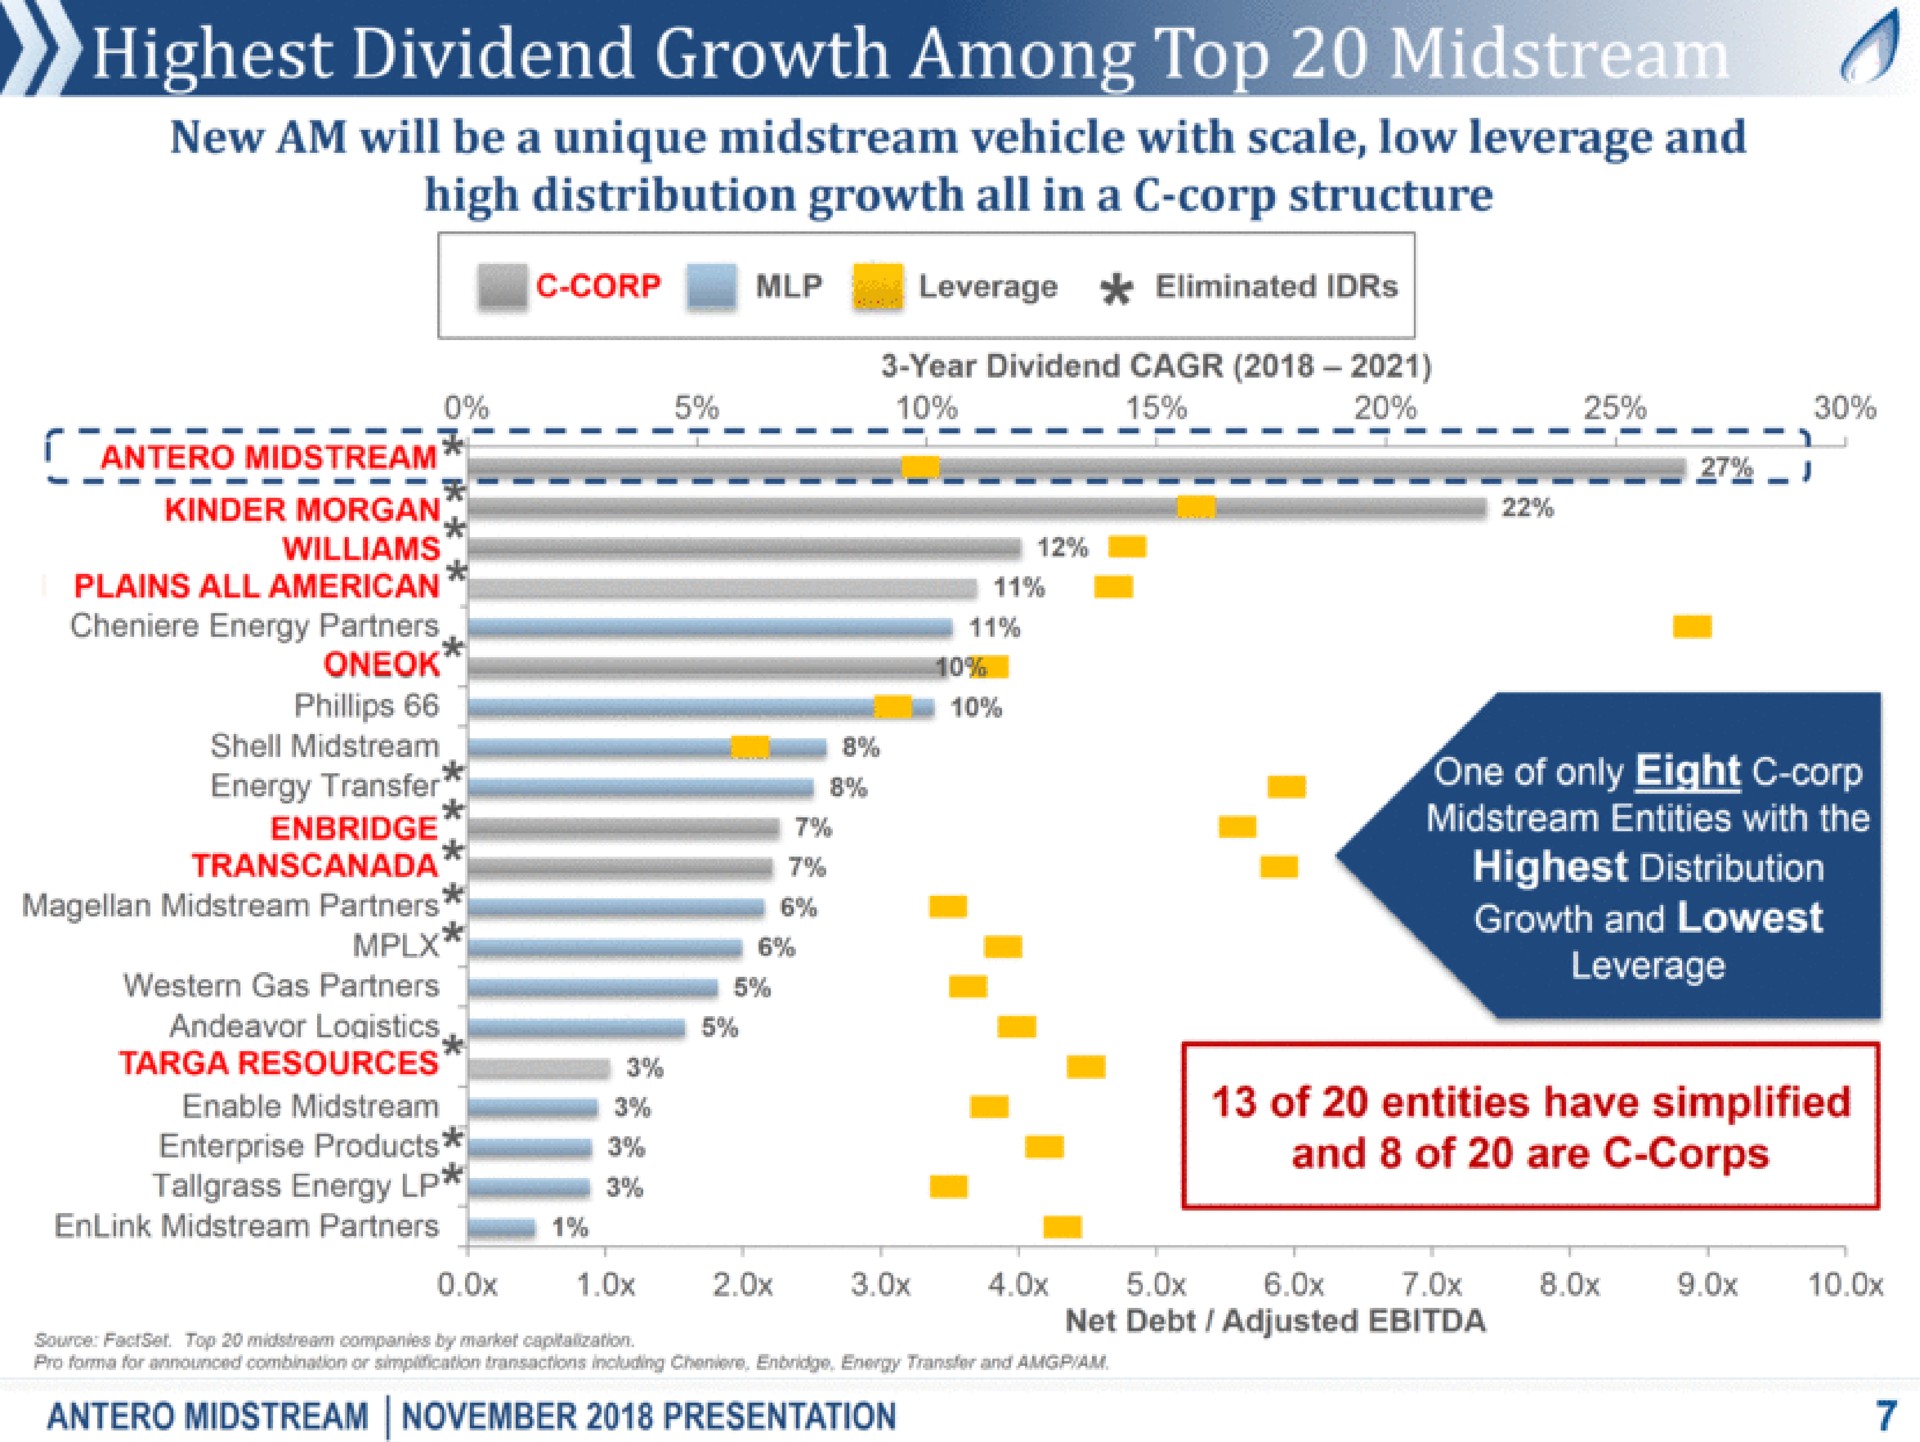 highest dividend growth among top mids new am will be a unique midstream vehicle with scale low leverage and high distribution growth all in a corp structure my corp leverage eliminated year dividend morgan i plains all energy partners see shell energy midstream partners a gas a resources enable midstream a enterprise products pam energy jams enlink midstream partners am one of only eight corp sit highest distribution growth and leverage of entities have simplified and of are corps source pro for or panes top con and net debt adjusted midstream presentation | Antero Midstream Partners